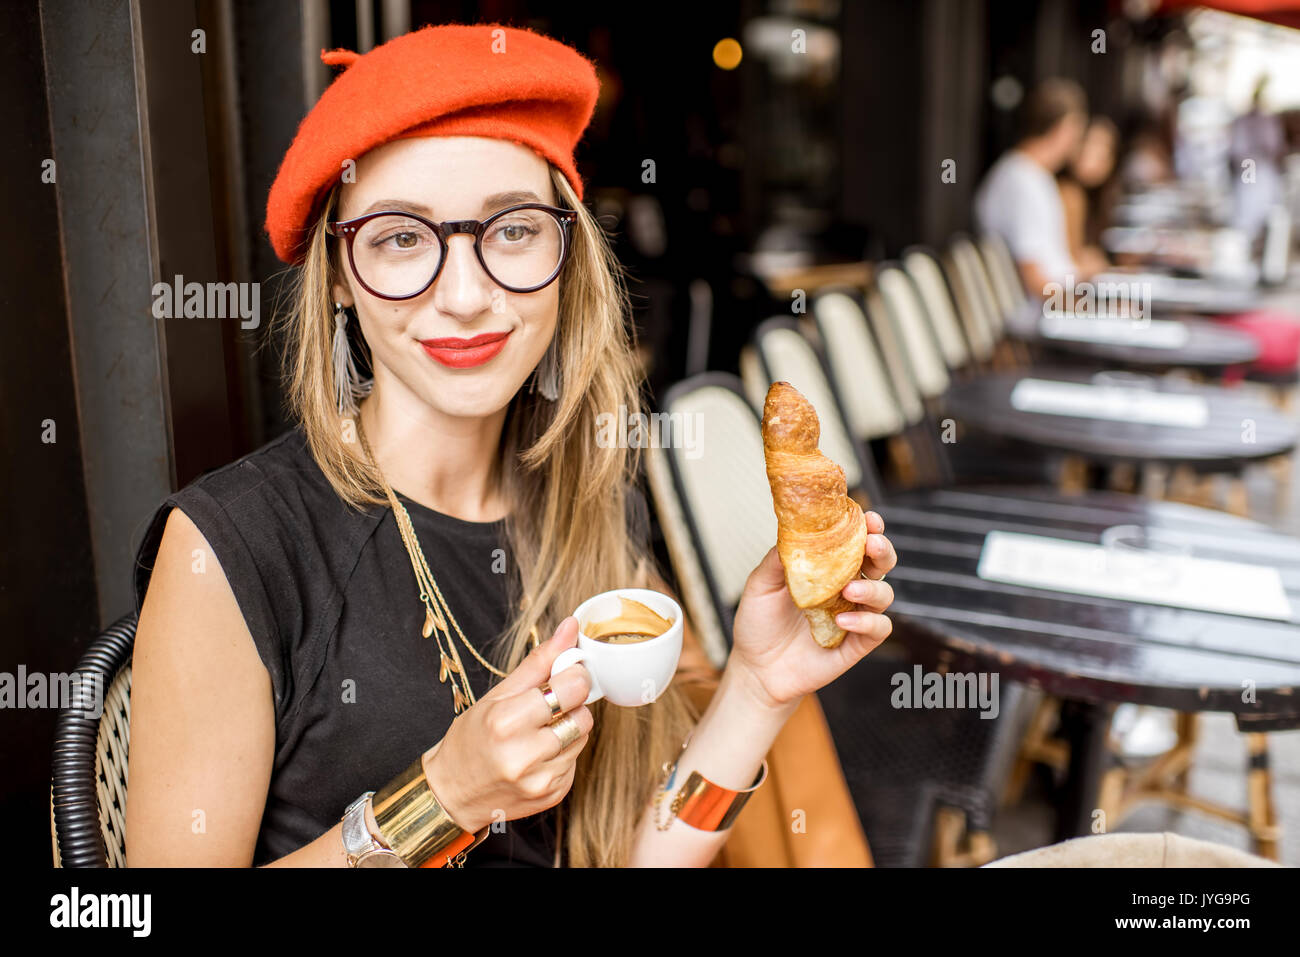 Woman having a french breakfast at the cafe Stock Photo